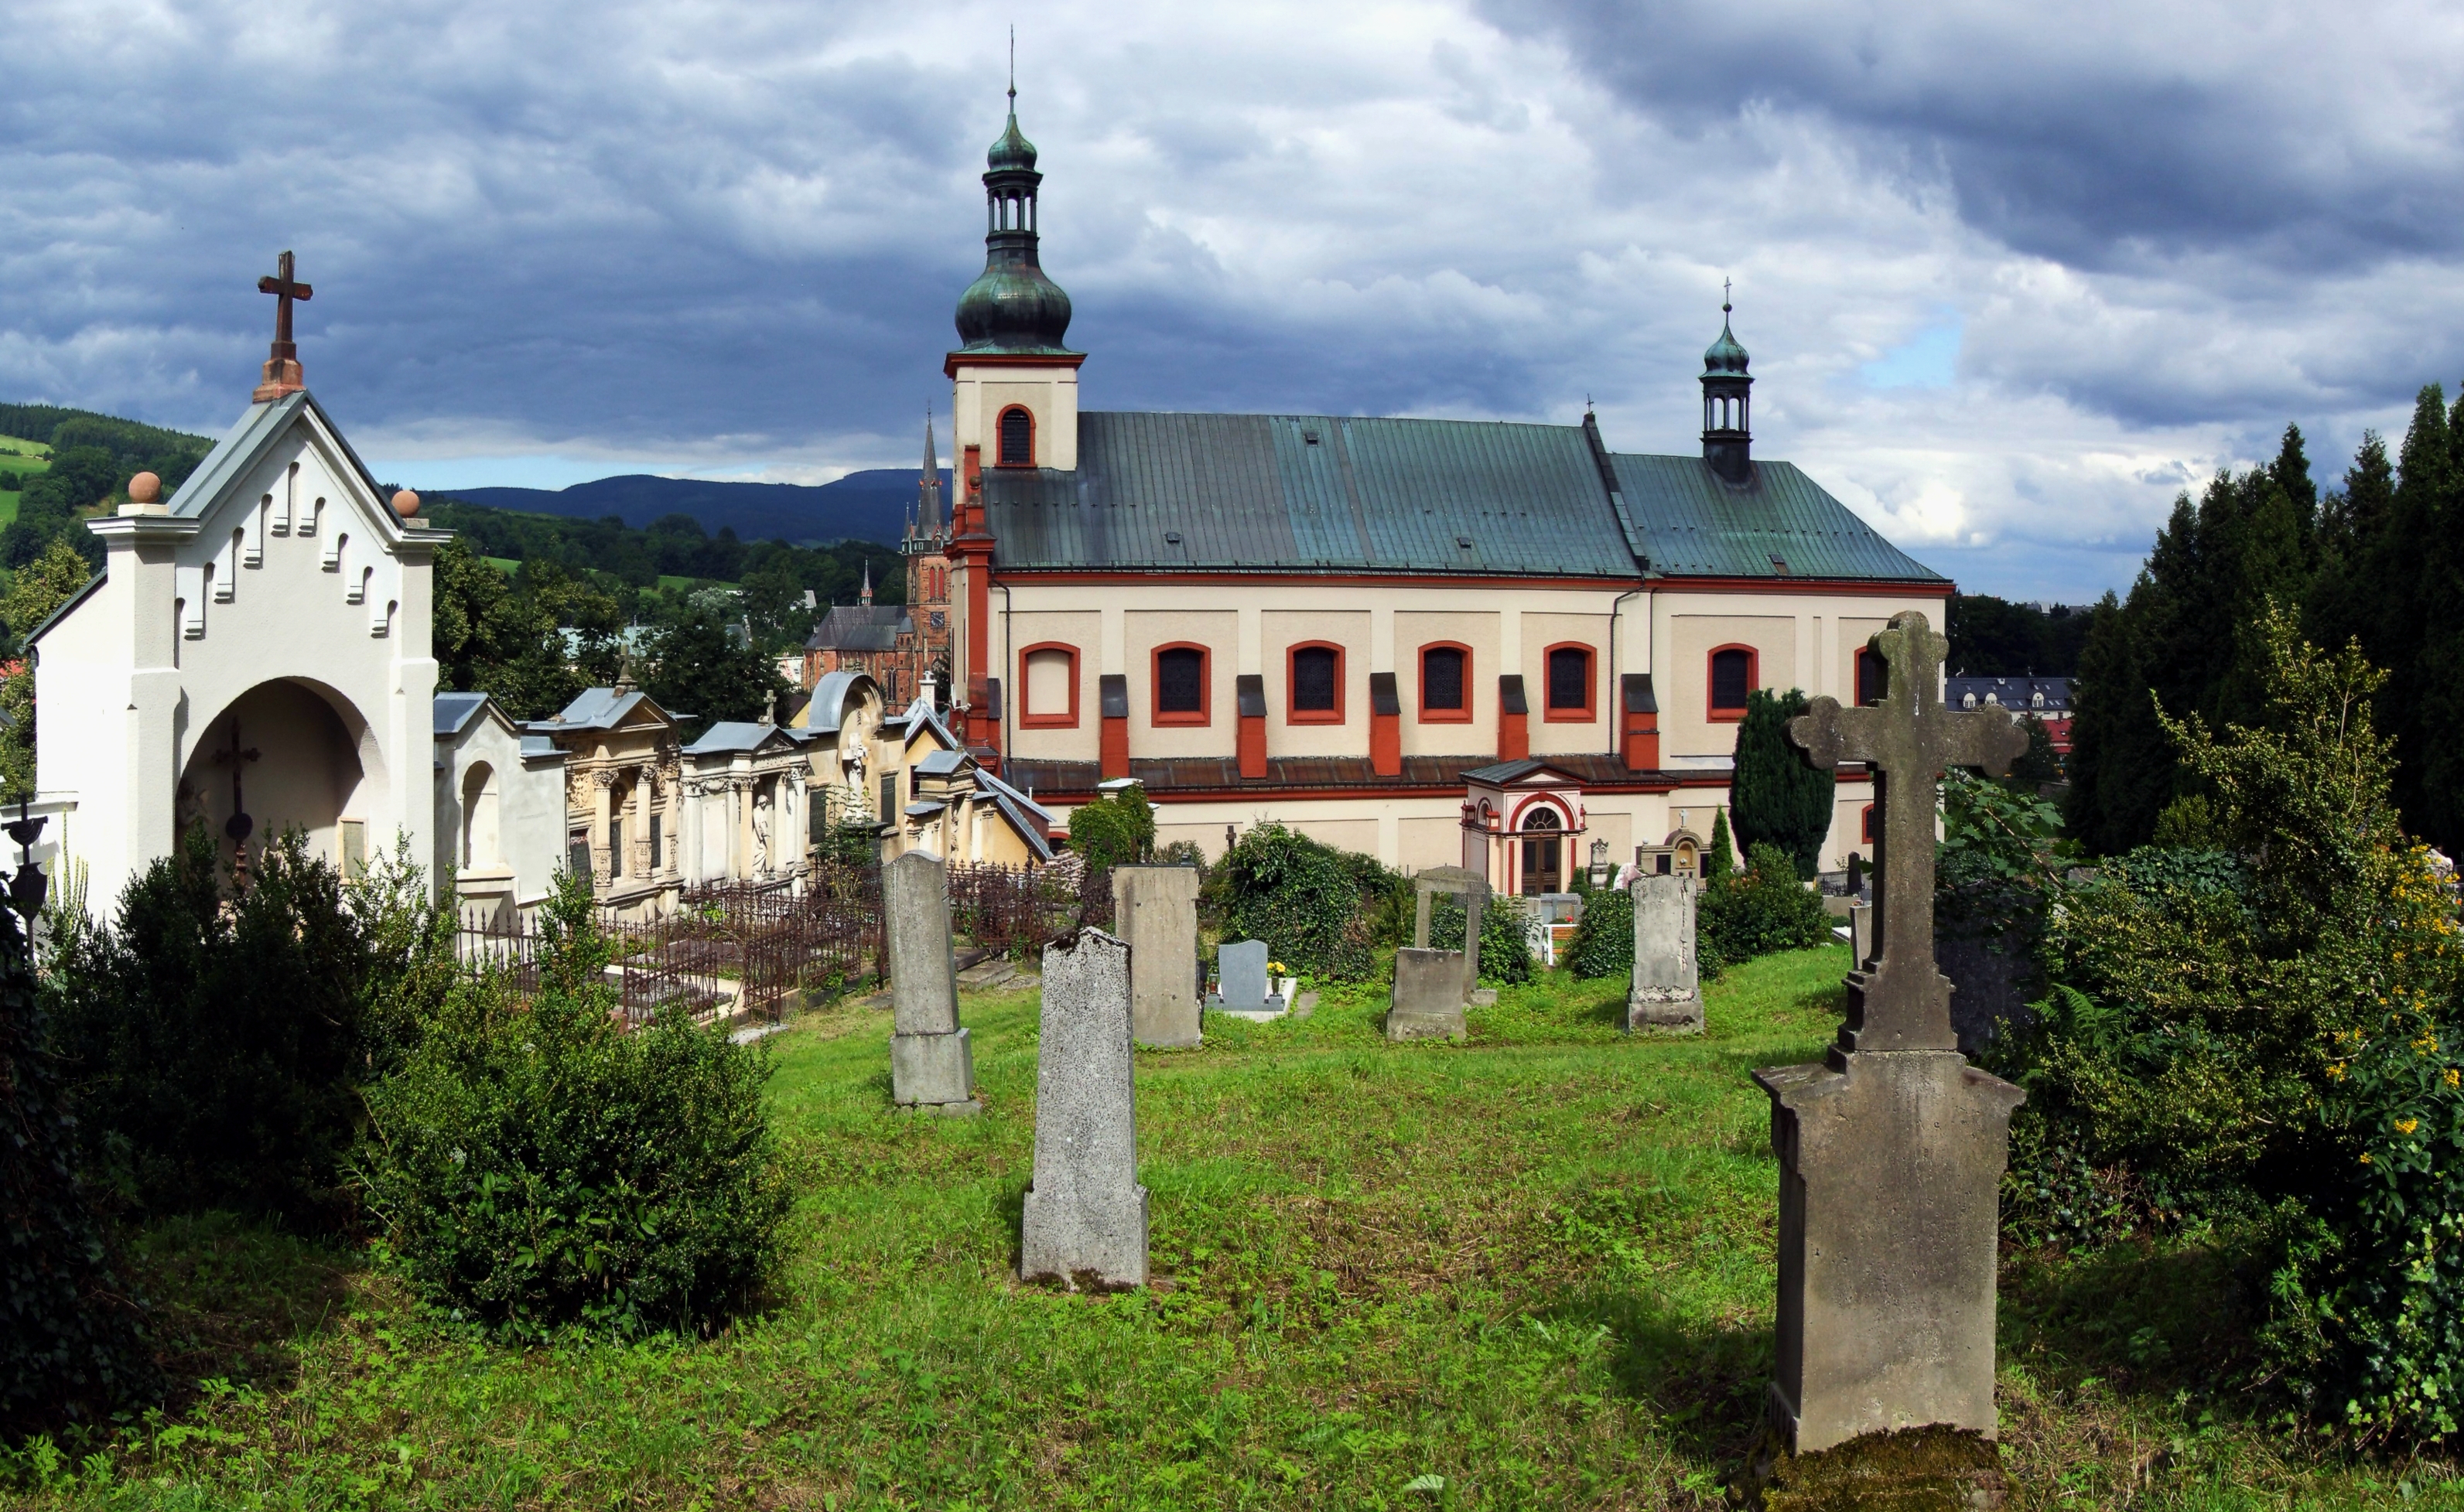 Vrchlabí (Hohenelbe) - church of St. Augustin (view from cemetery)